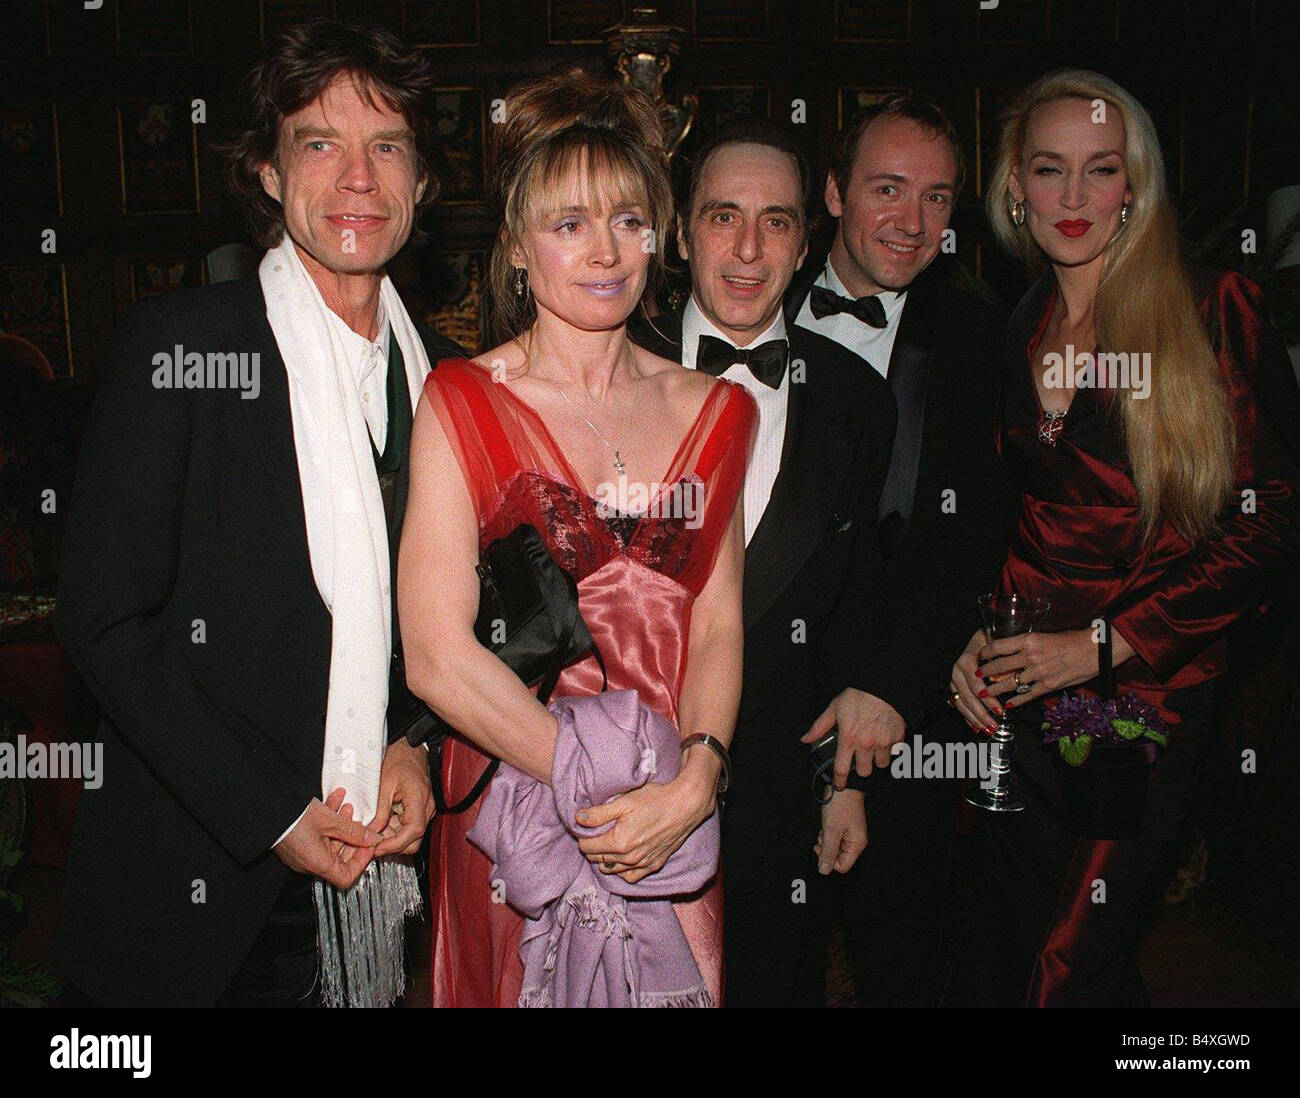 The Premiere party for film Looking For Richard L R Mick Jagger Lyndall Hobbs Al Pacino Kevin Spacey and Jerry Hall Stock Photo